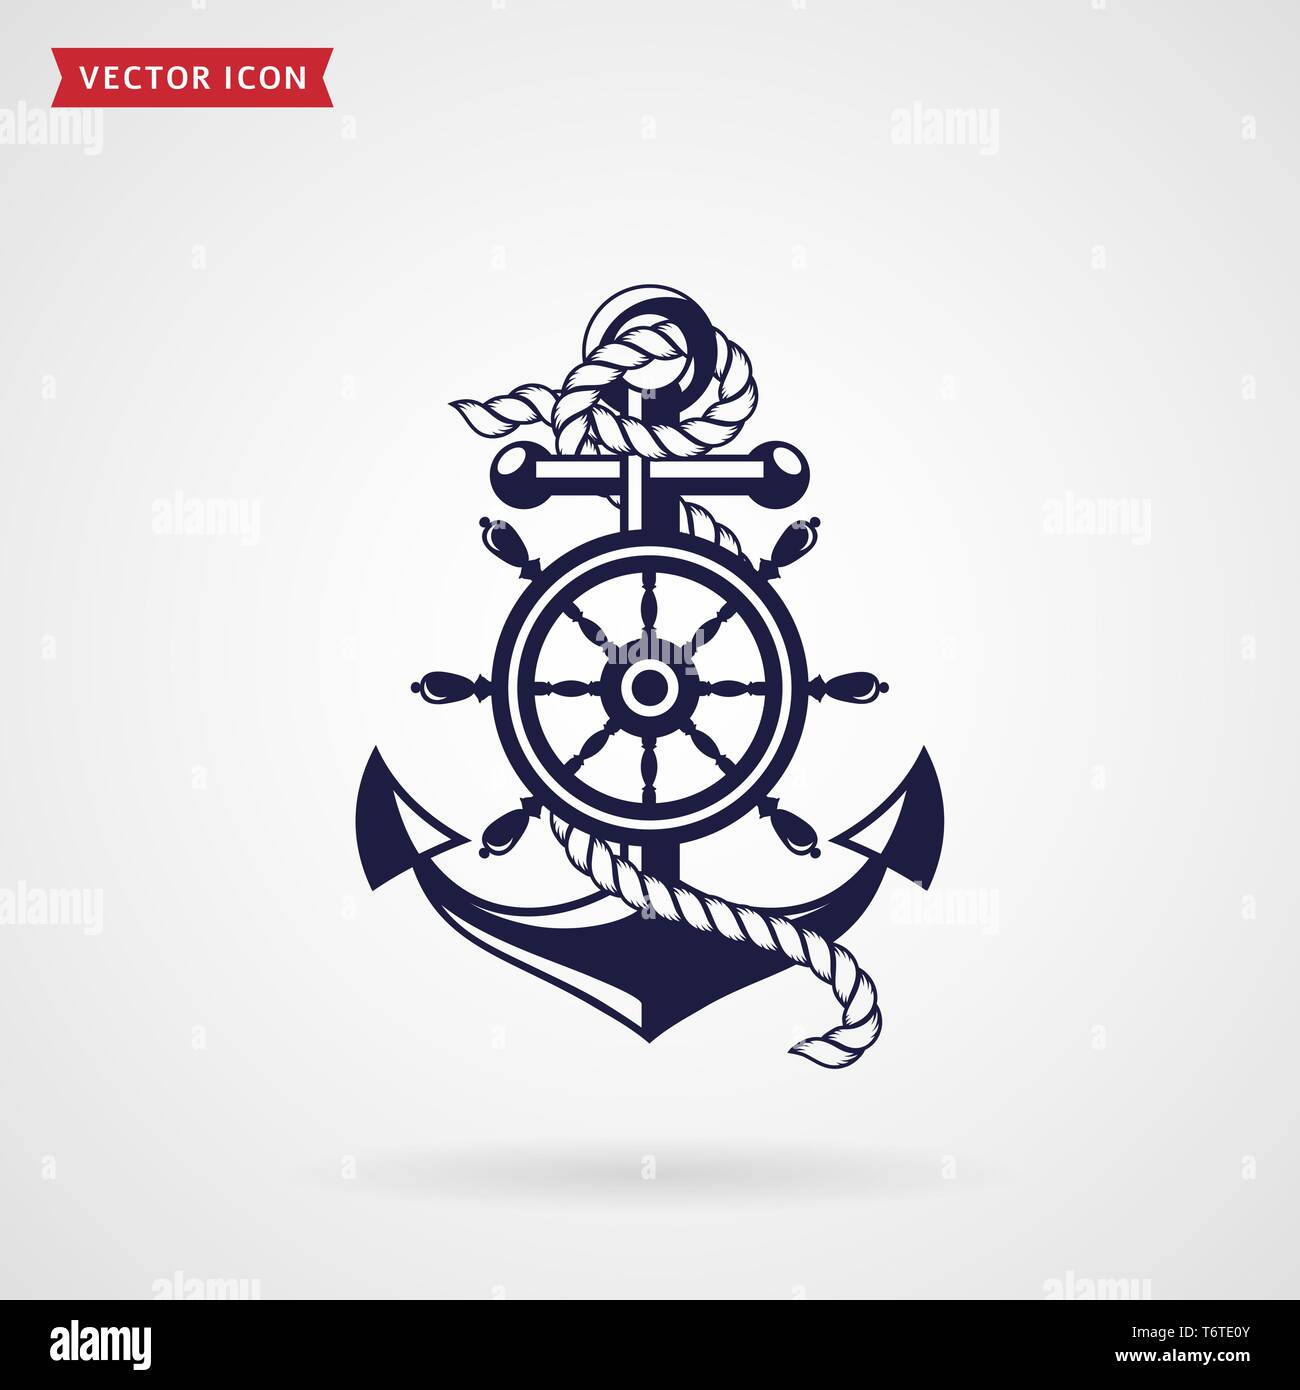 Anchor with a rope and a steering wheel. Icon isolated on white background. Sea travel and nautical themes. Vector design element. Stock Vector